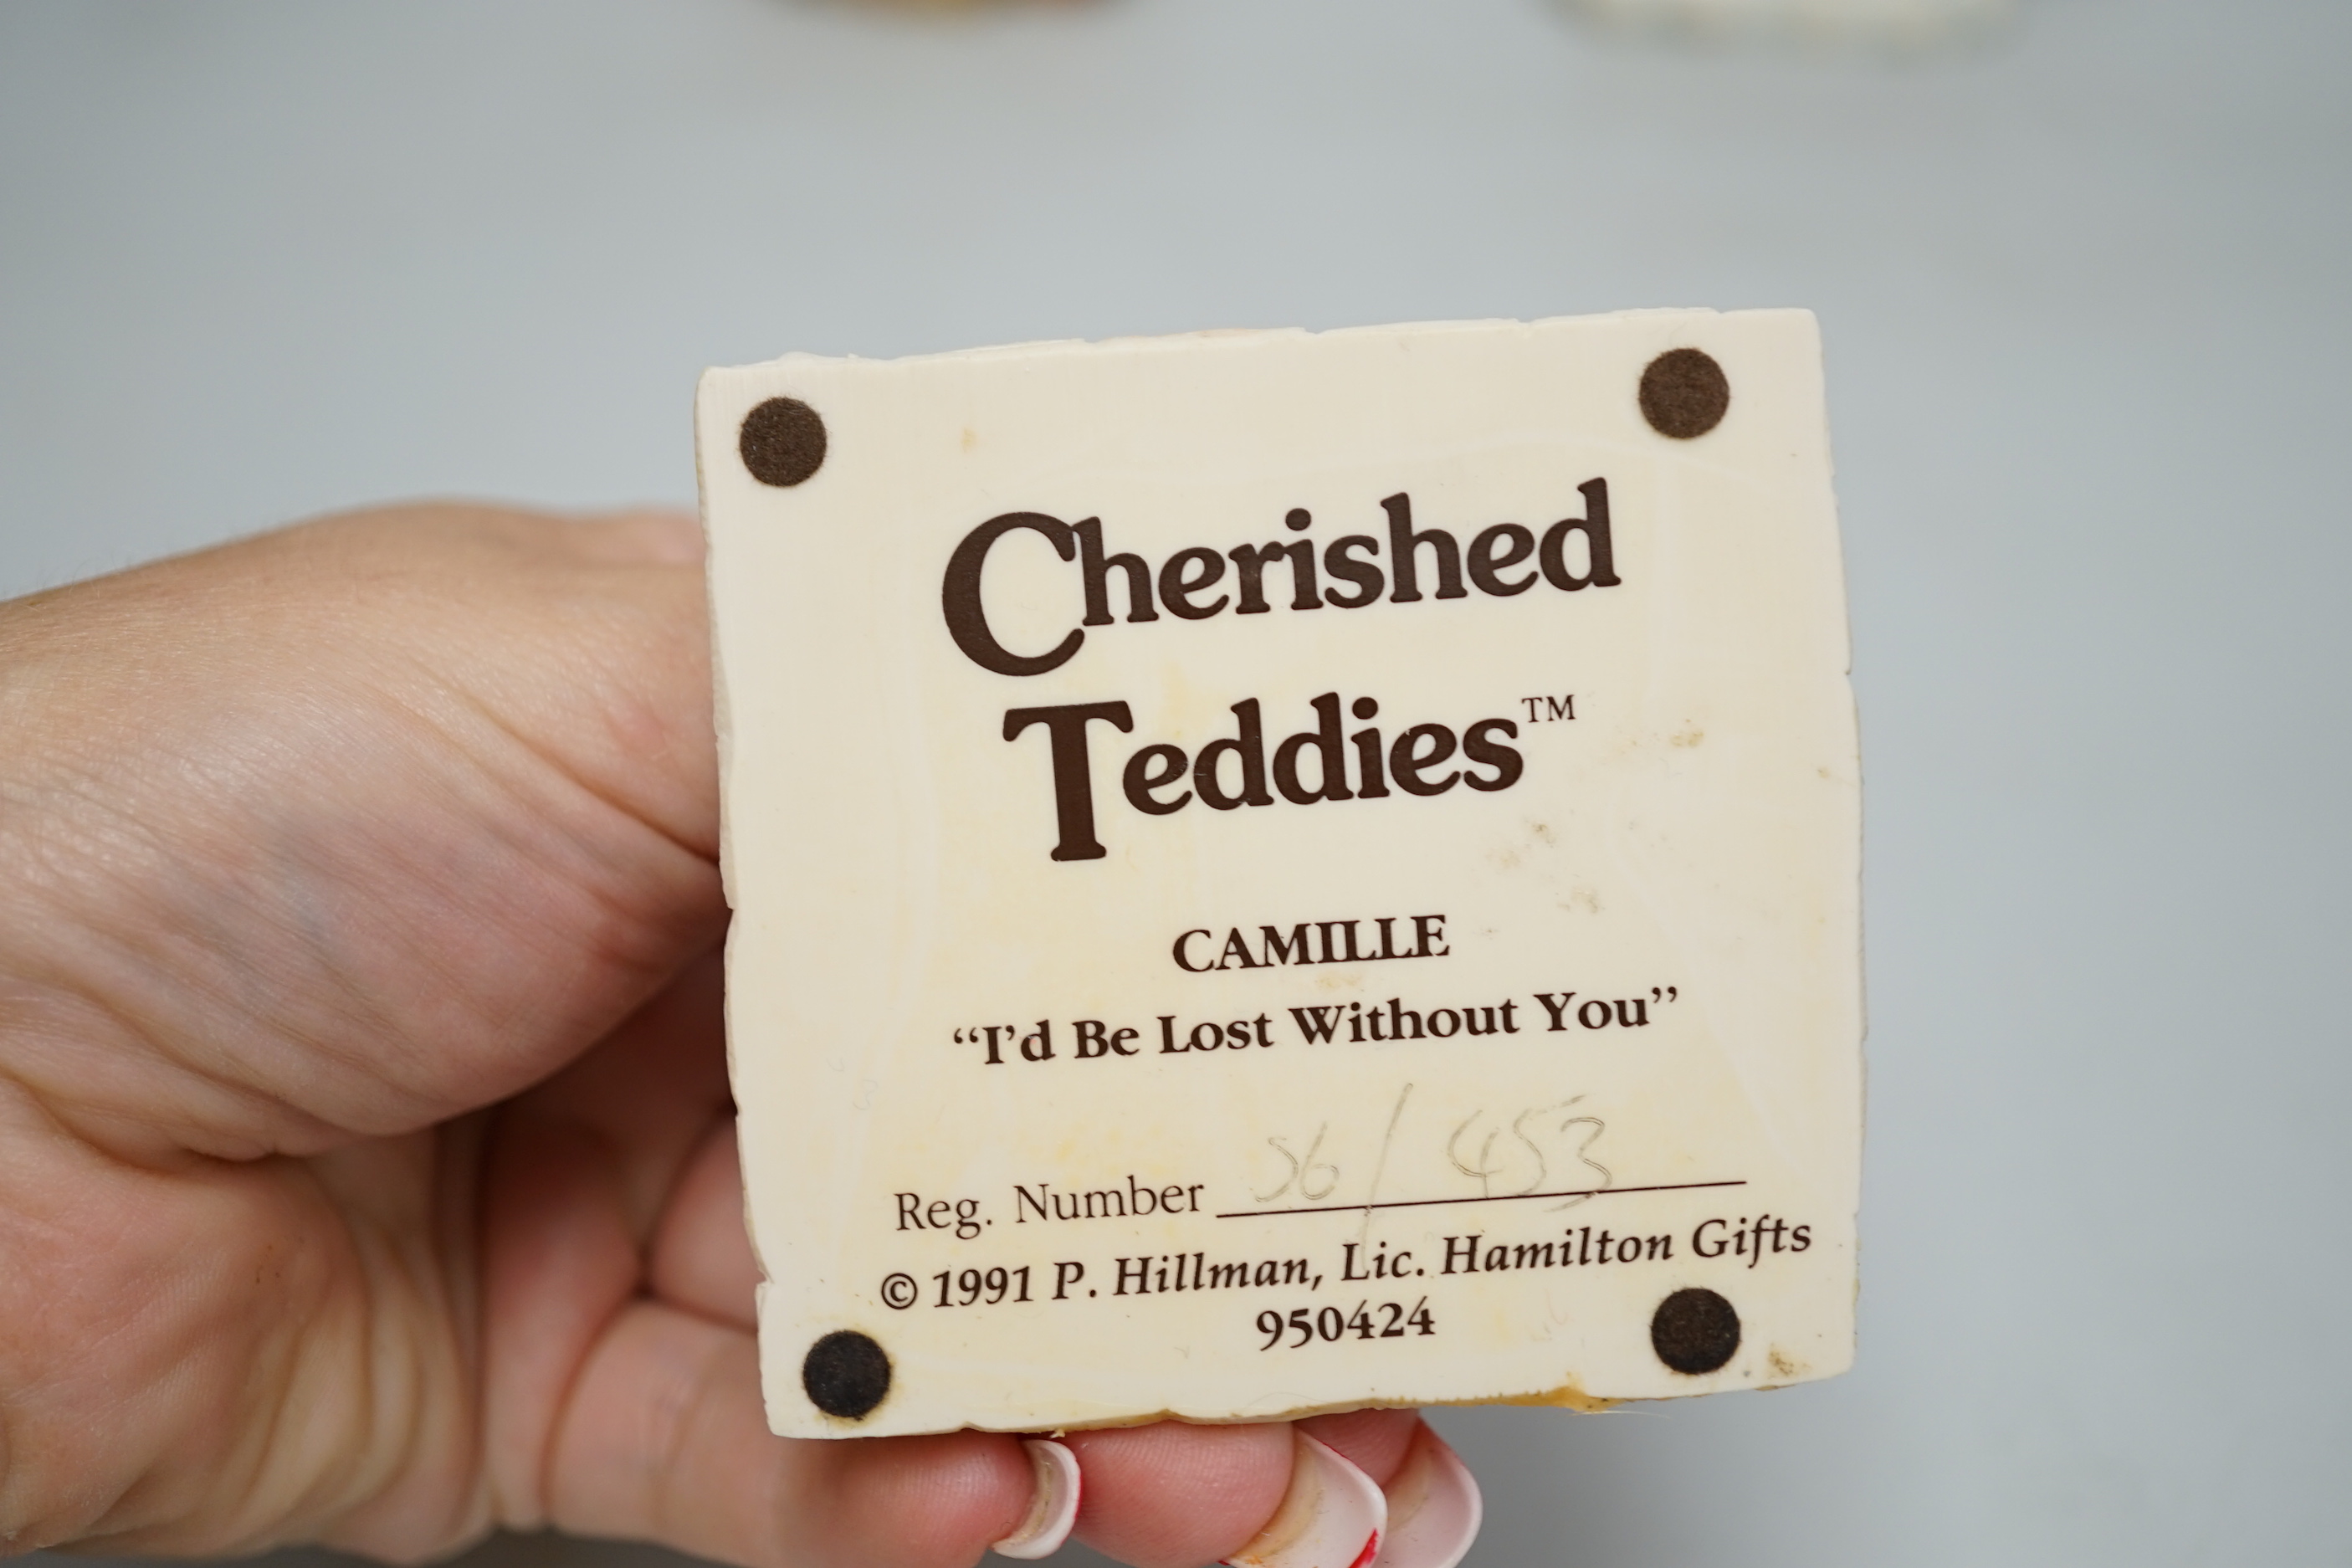 A collection of “Cherished Teddies” TM